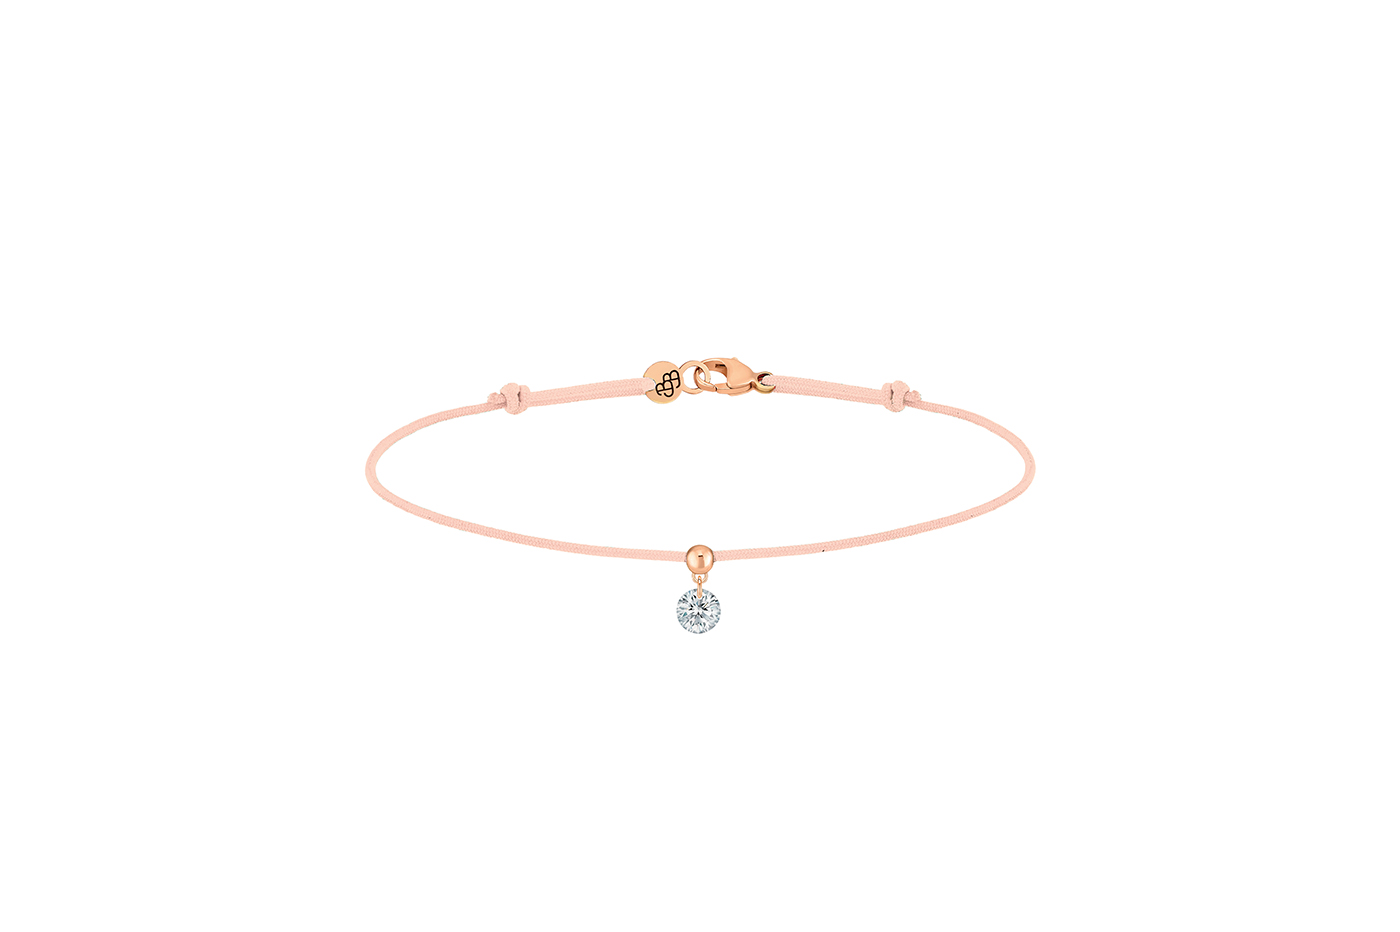 Bracelet BB, diamant GSI, 0,15 ct approx., cordon NUDE, or 18KT, 0,35gr. Collection BB Référence :  BC0003PGDINU -1